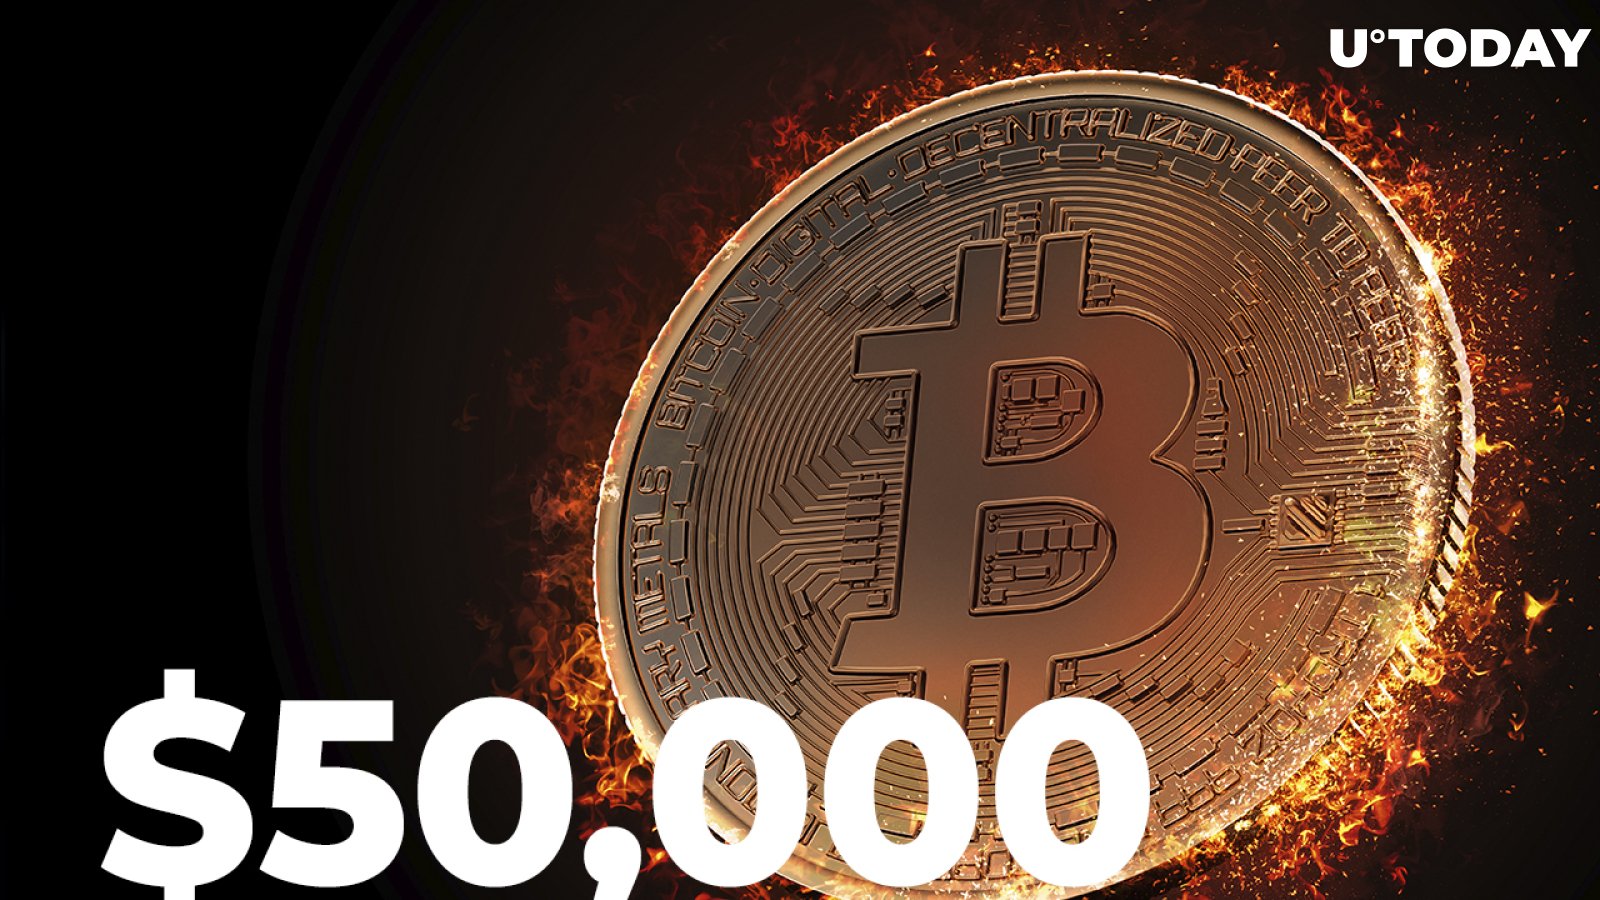 Here's How Bitcoin May Reach $50,000